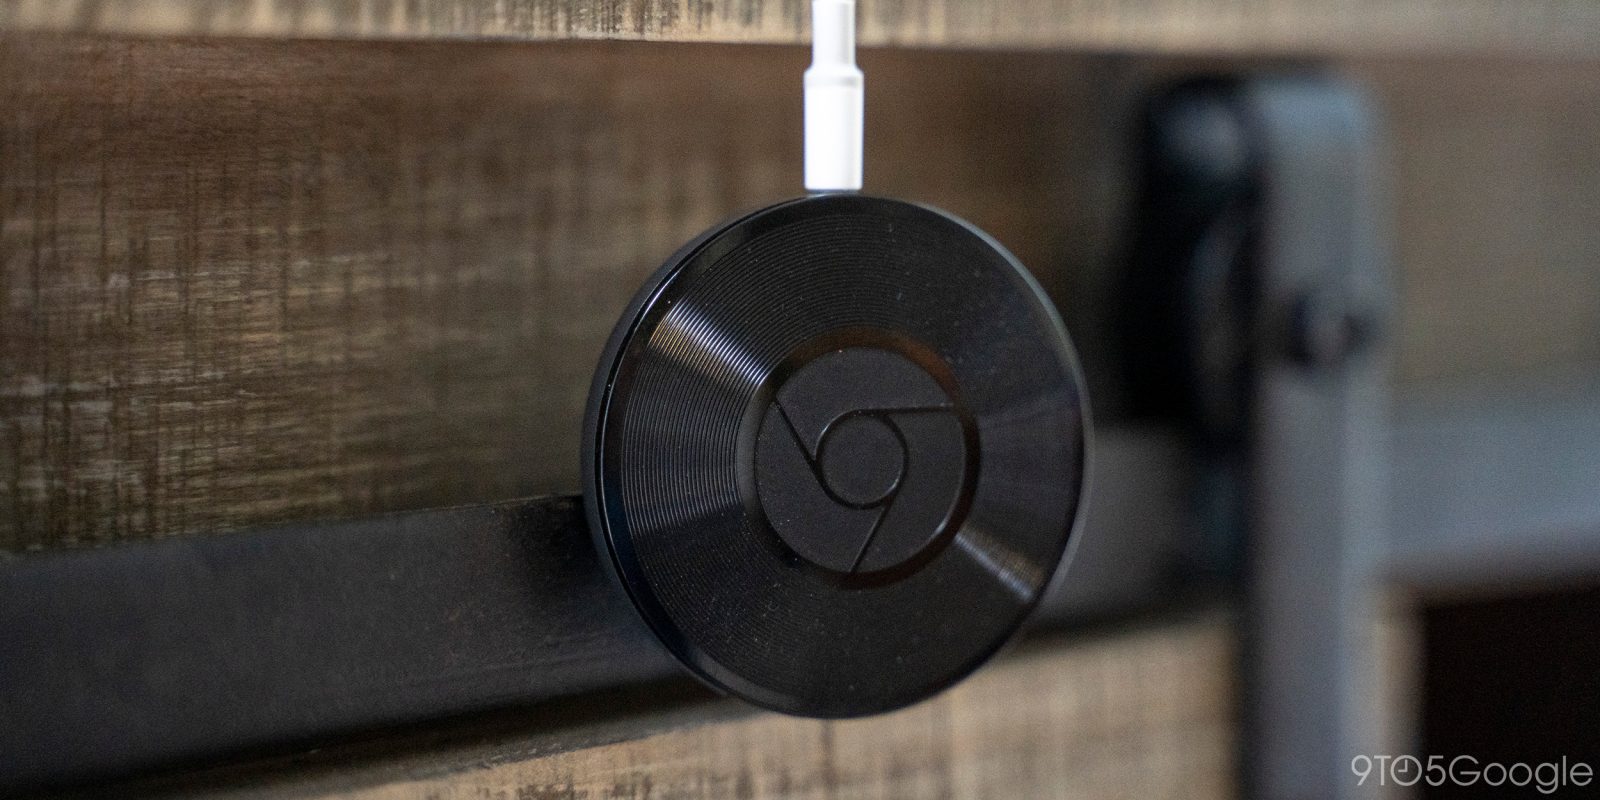 Fonetiek cowboy Of anders Chromecast Audio could be reborn w/ Assistant's 'Nest Mini' - 9to5Google